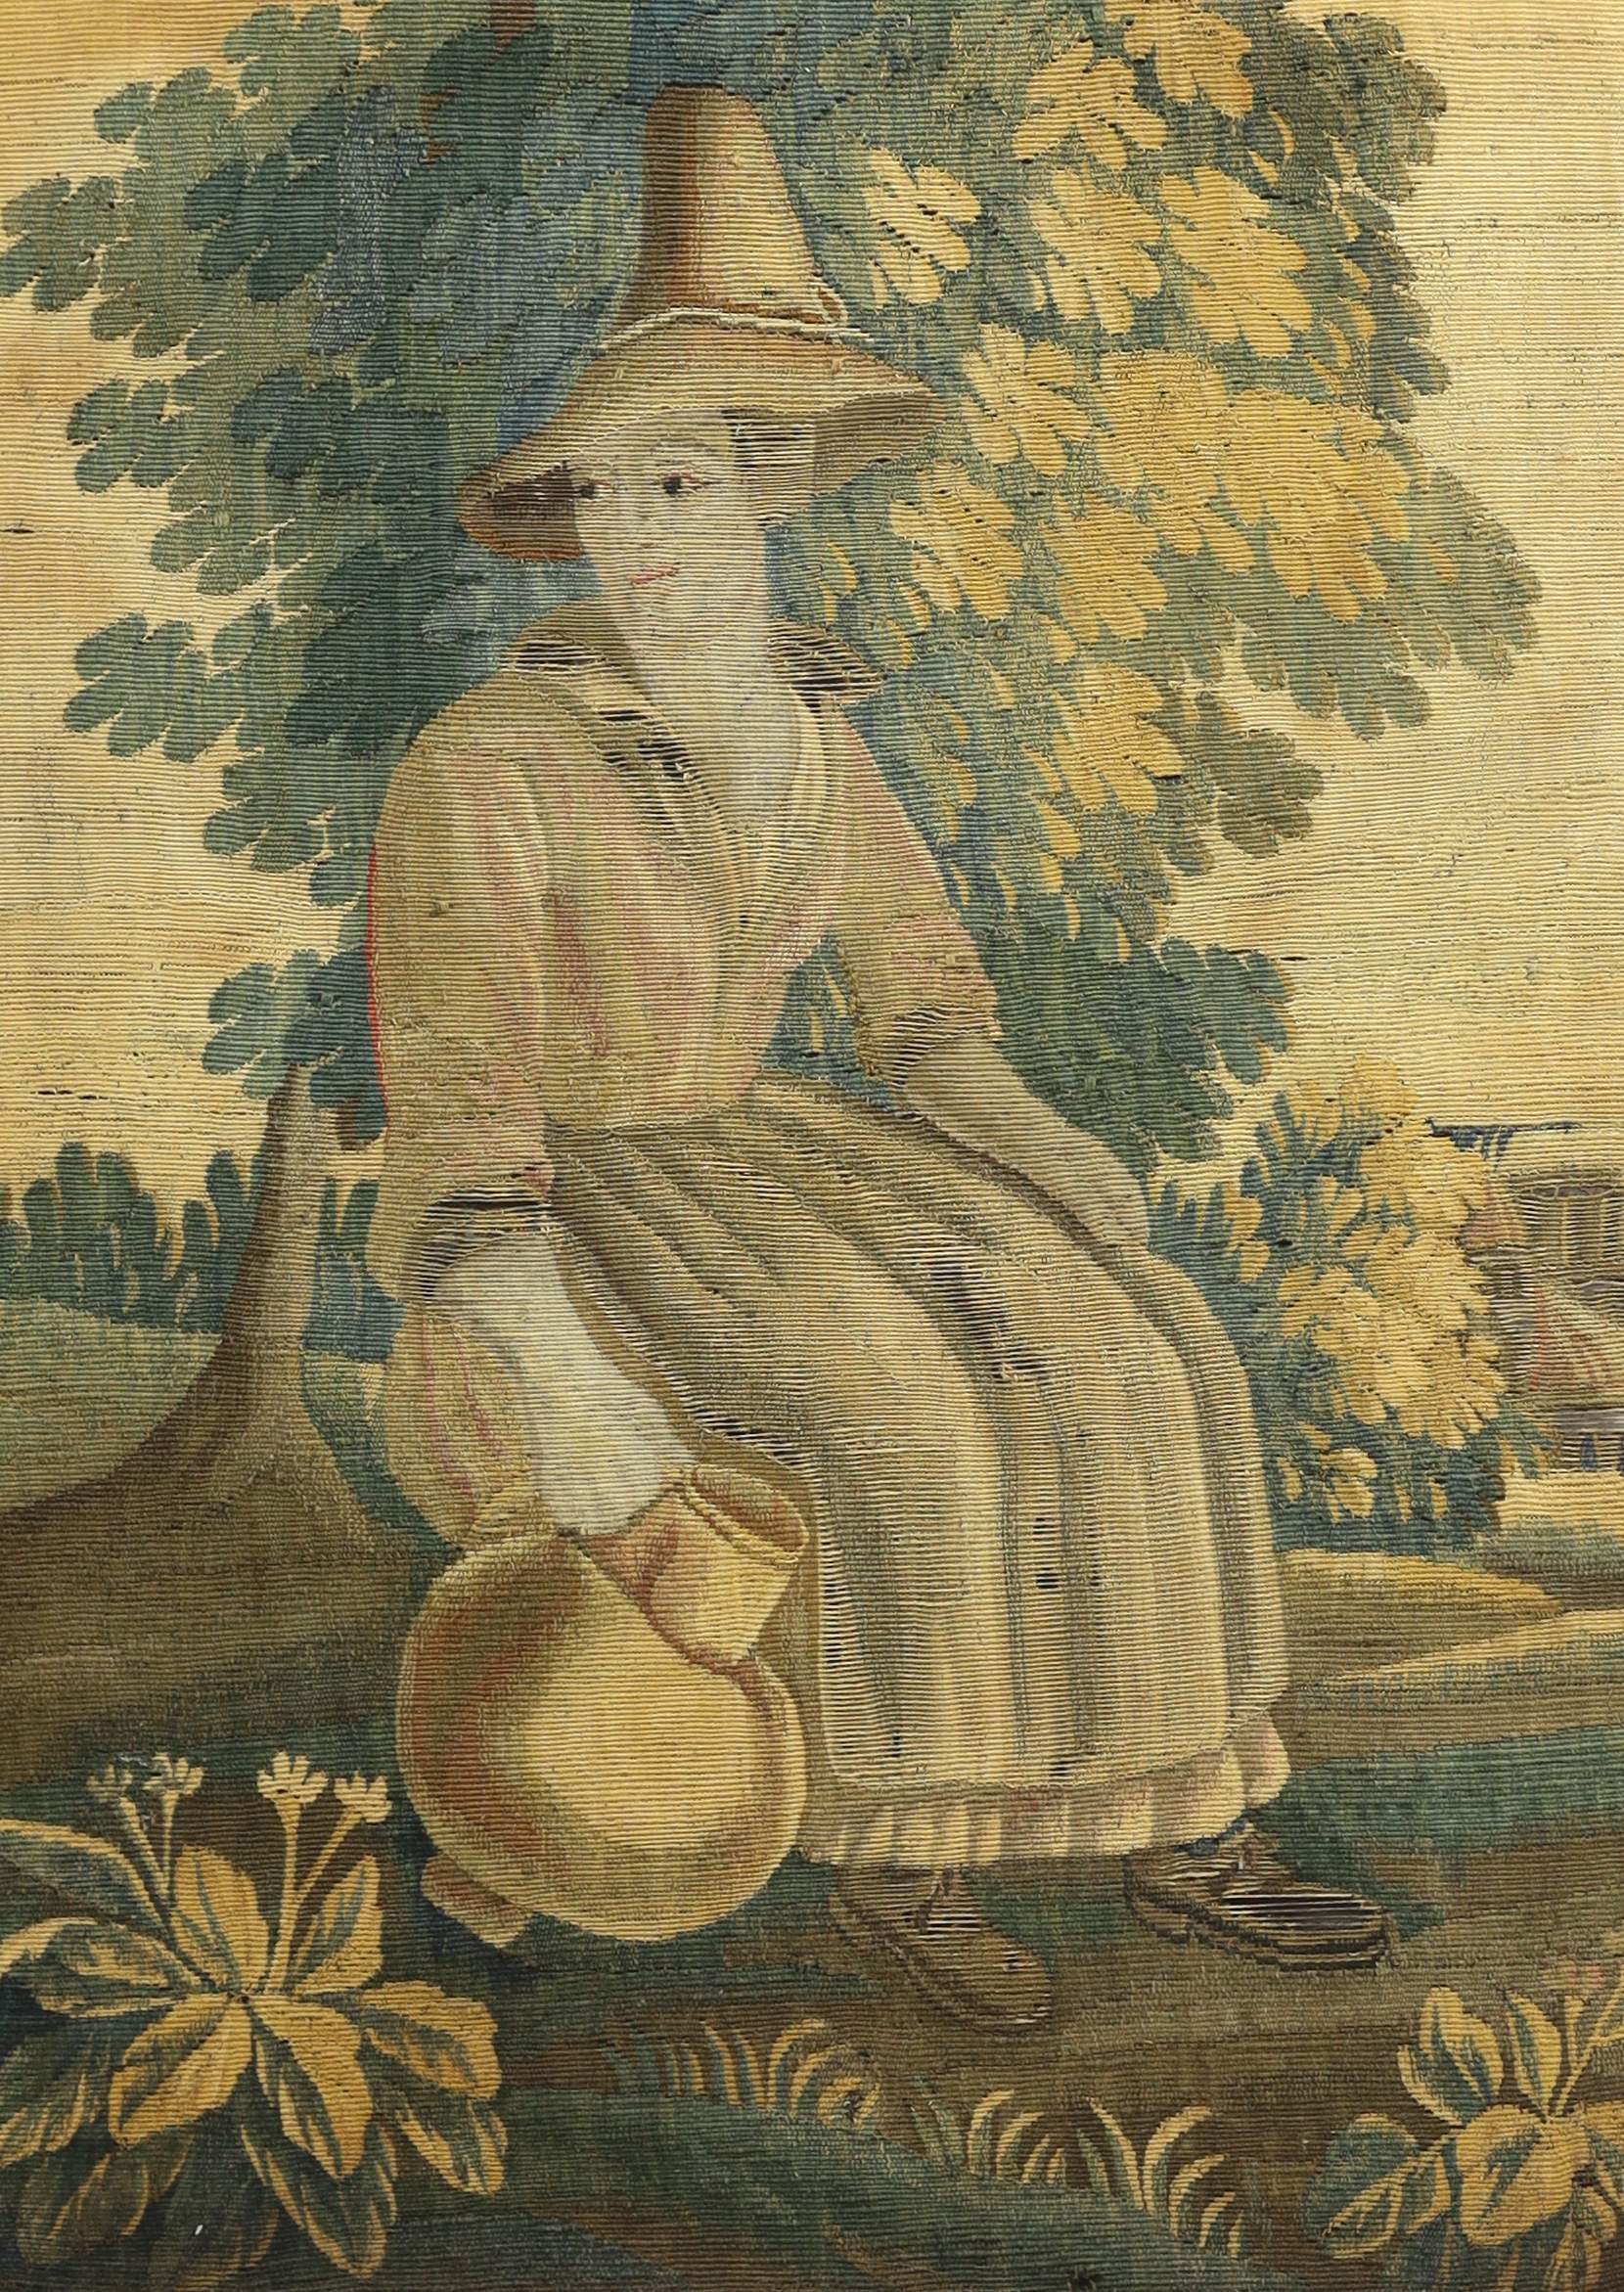 Two 18th century Brussels verdure tapestry panels, one of a seated peasant lady holding a flagon and the other a similar gentleman holding a large tankard, surrounded by lush green landscape, probably part of a larger ta